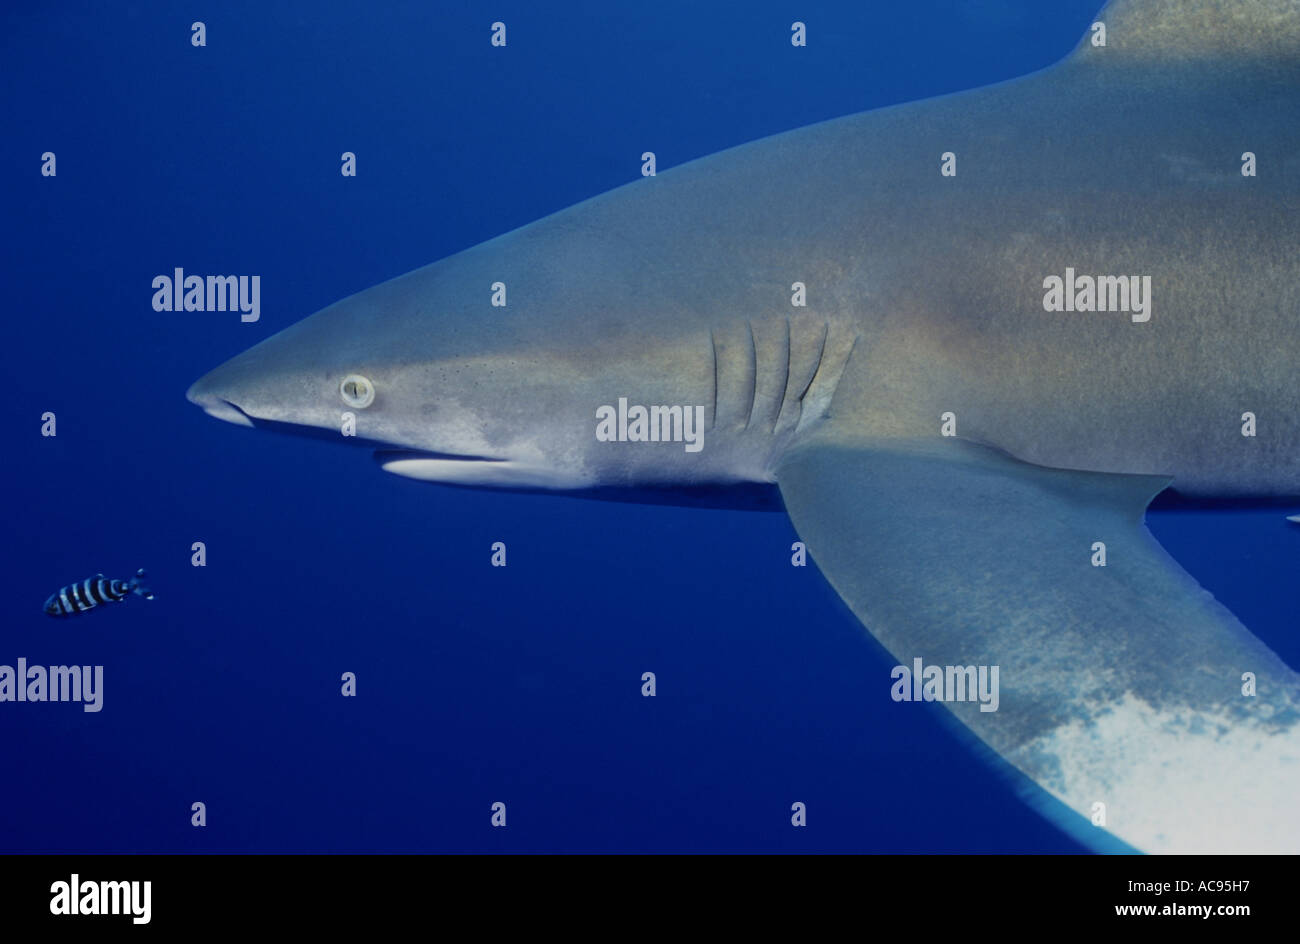 oceanic whitetip shark, whitetip shark, whitetip oceanic shark (Carcharhinus longimanus, Carcharhinus maou), from above Stock Photo